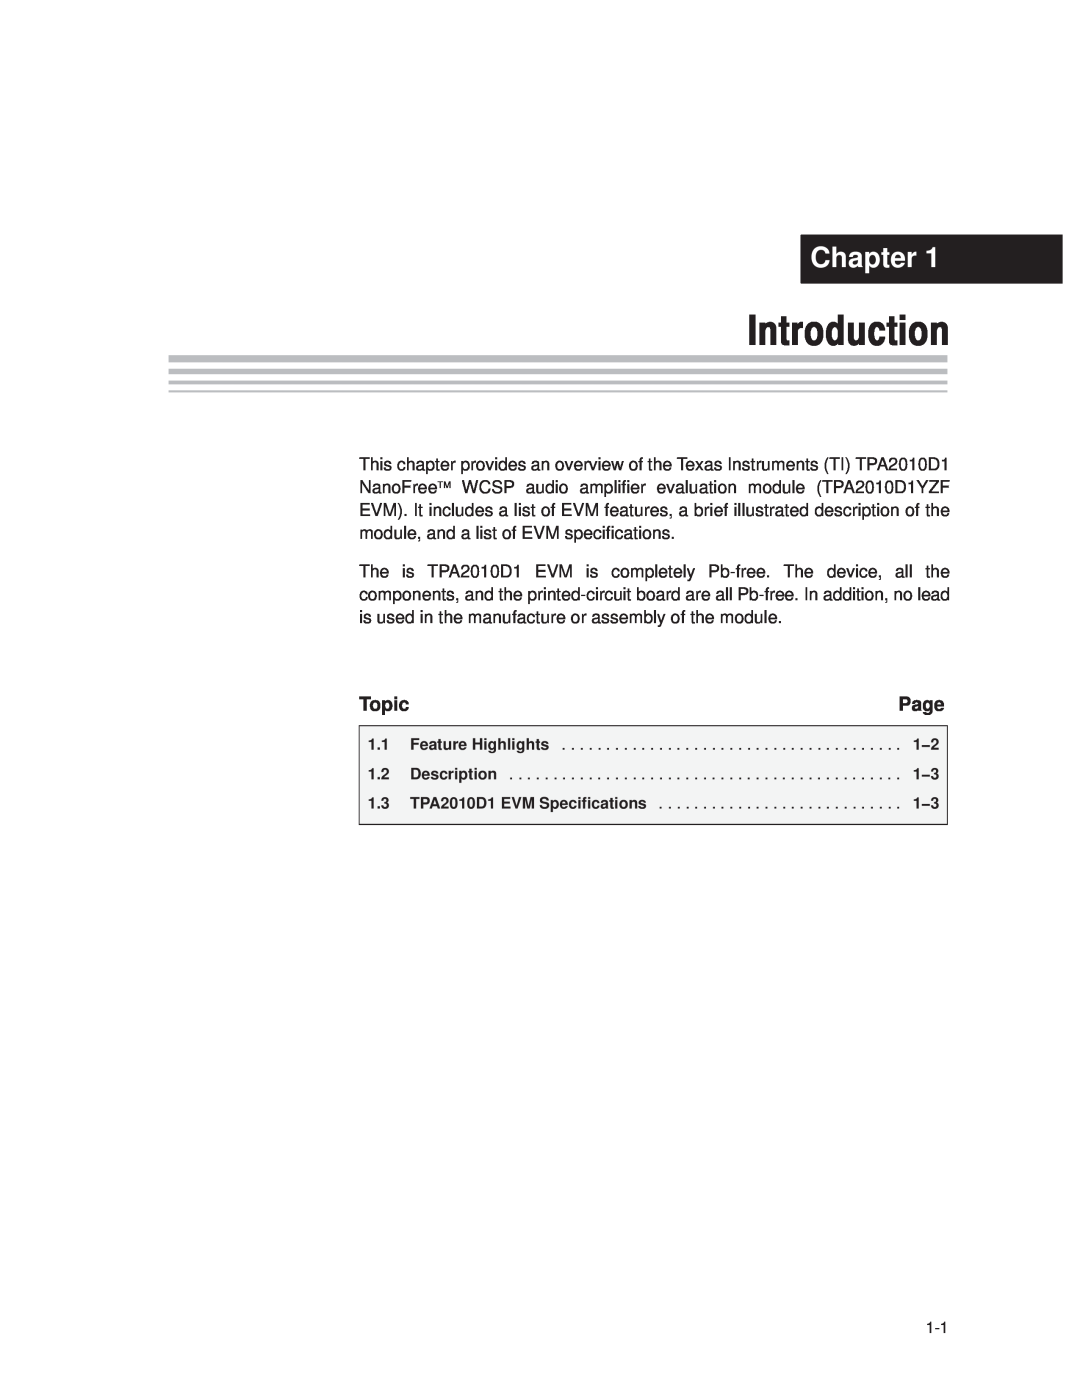 Texas Instruments 2004 manual Introduction, Chapter, Page, Topic 